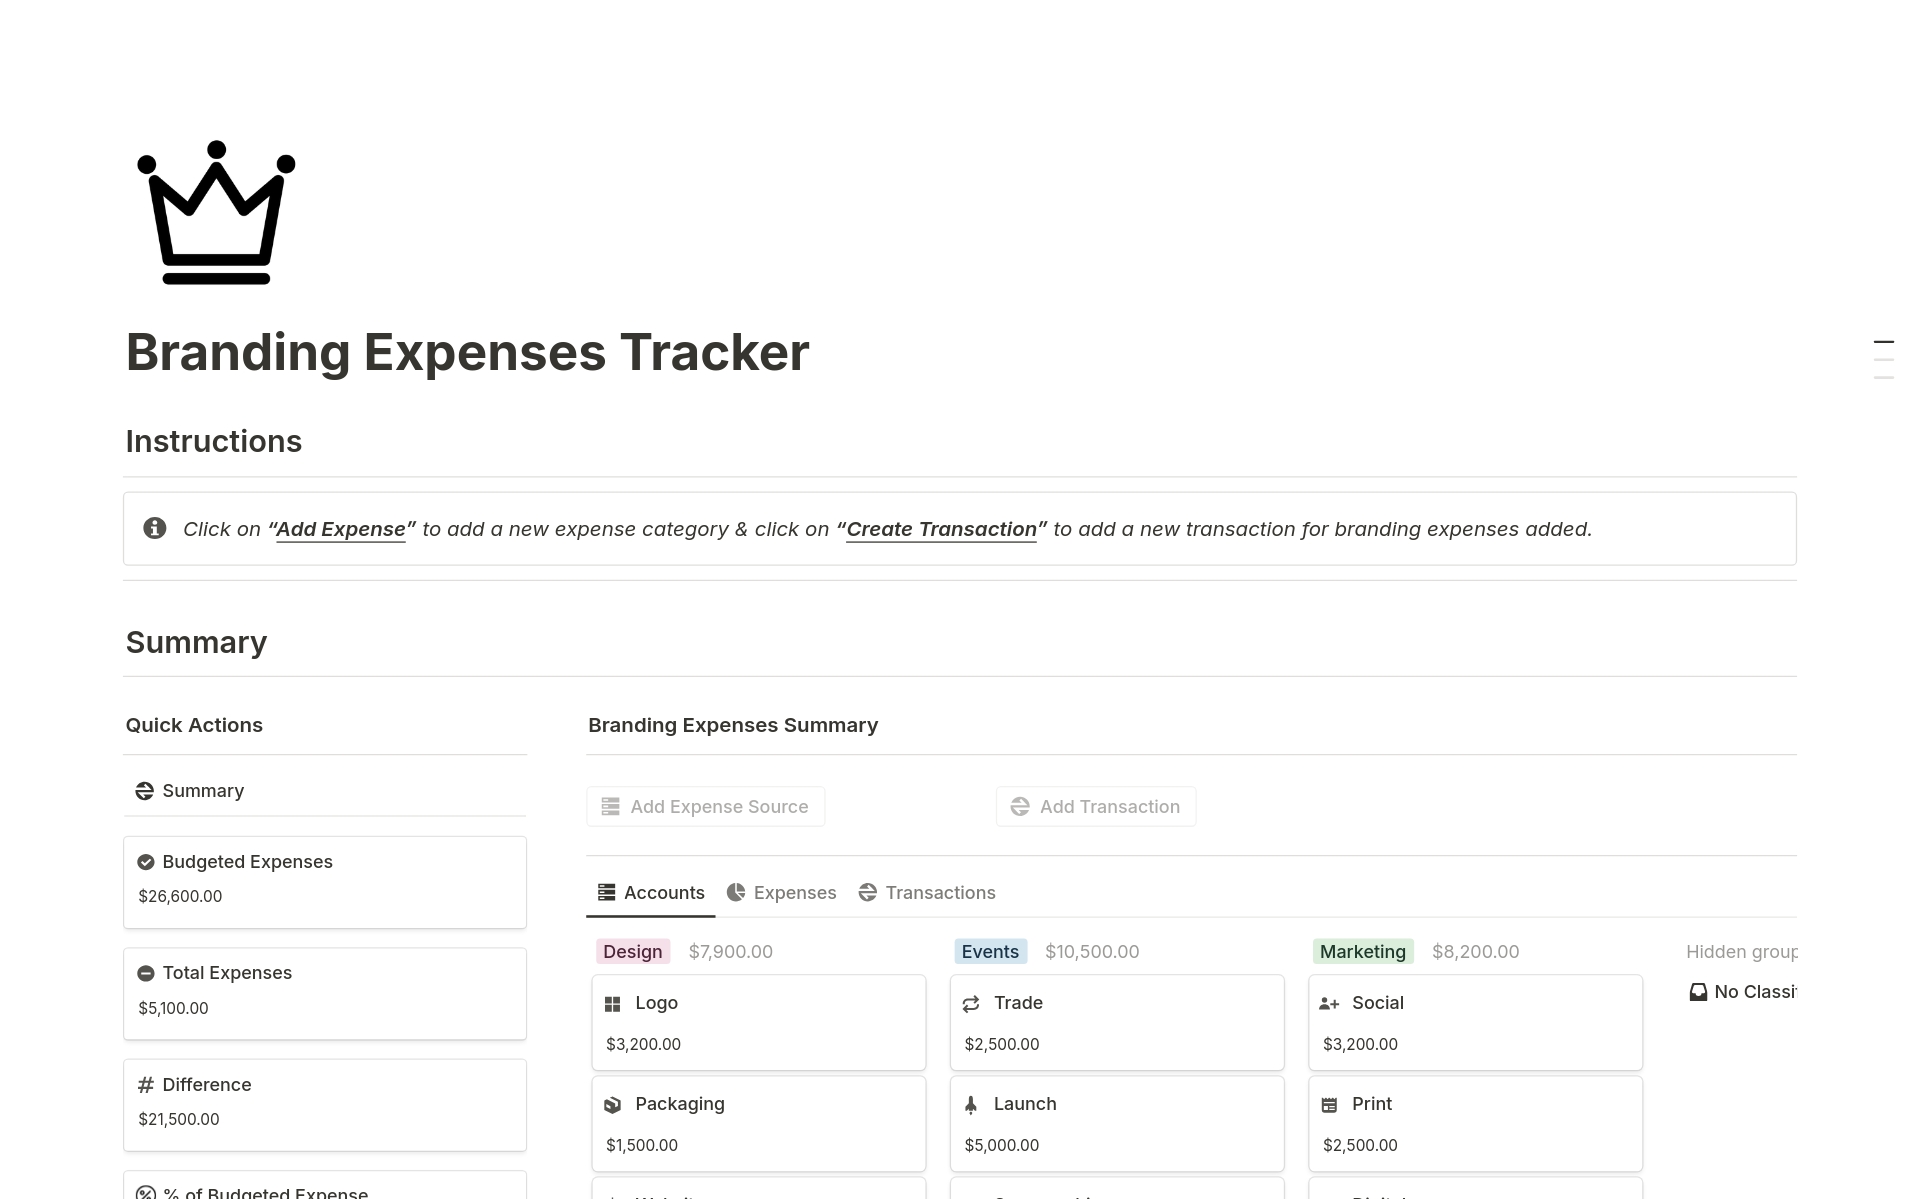 Ideal for those who are looking to manage their business branding expenses, this tracker helps you keep track of branding expenses such as design, events, marketing expenses and much more.